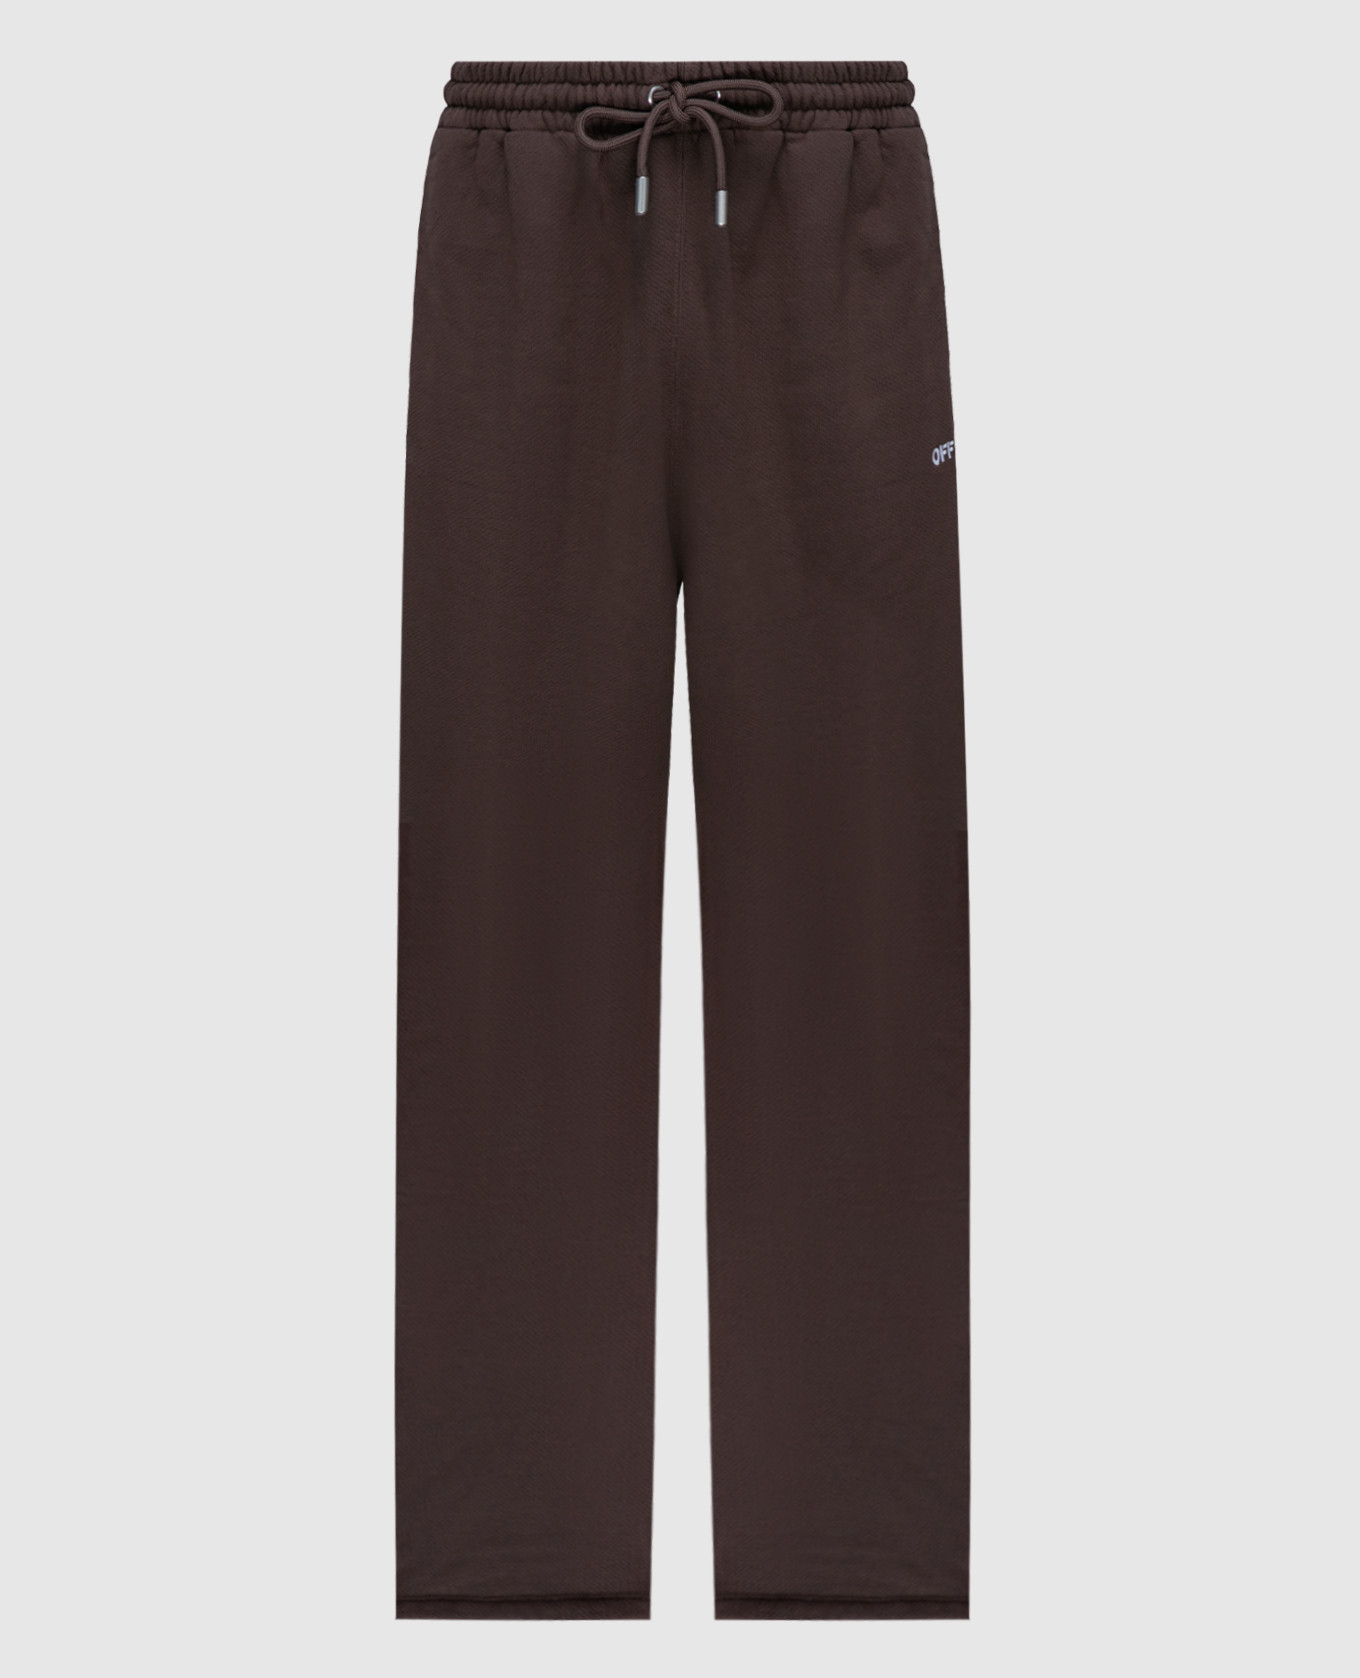 Brown sweatpants with logo embroidery